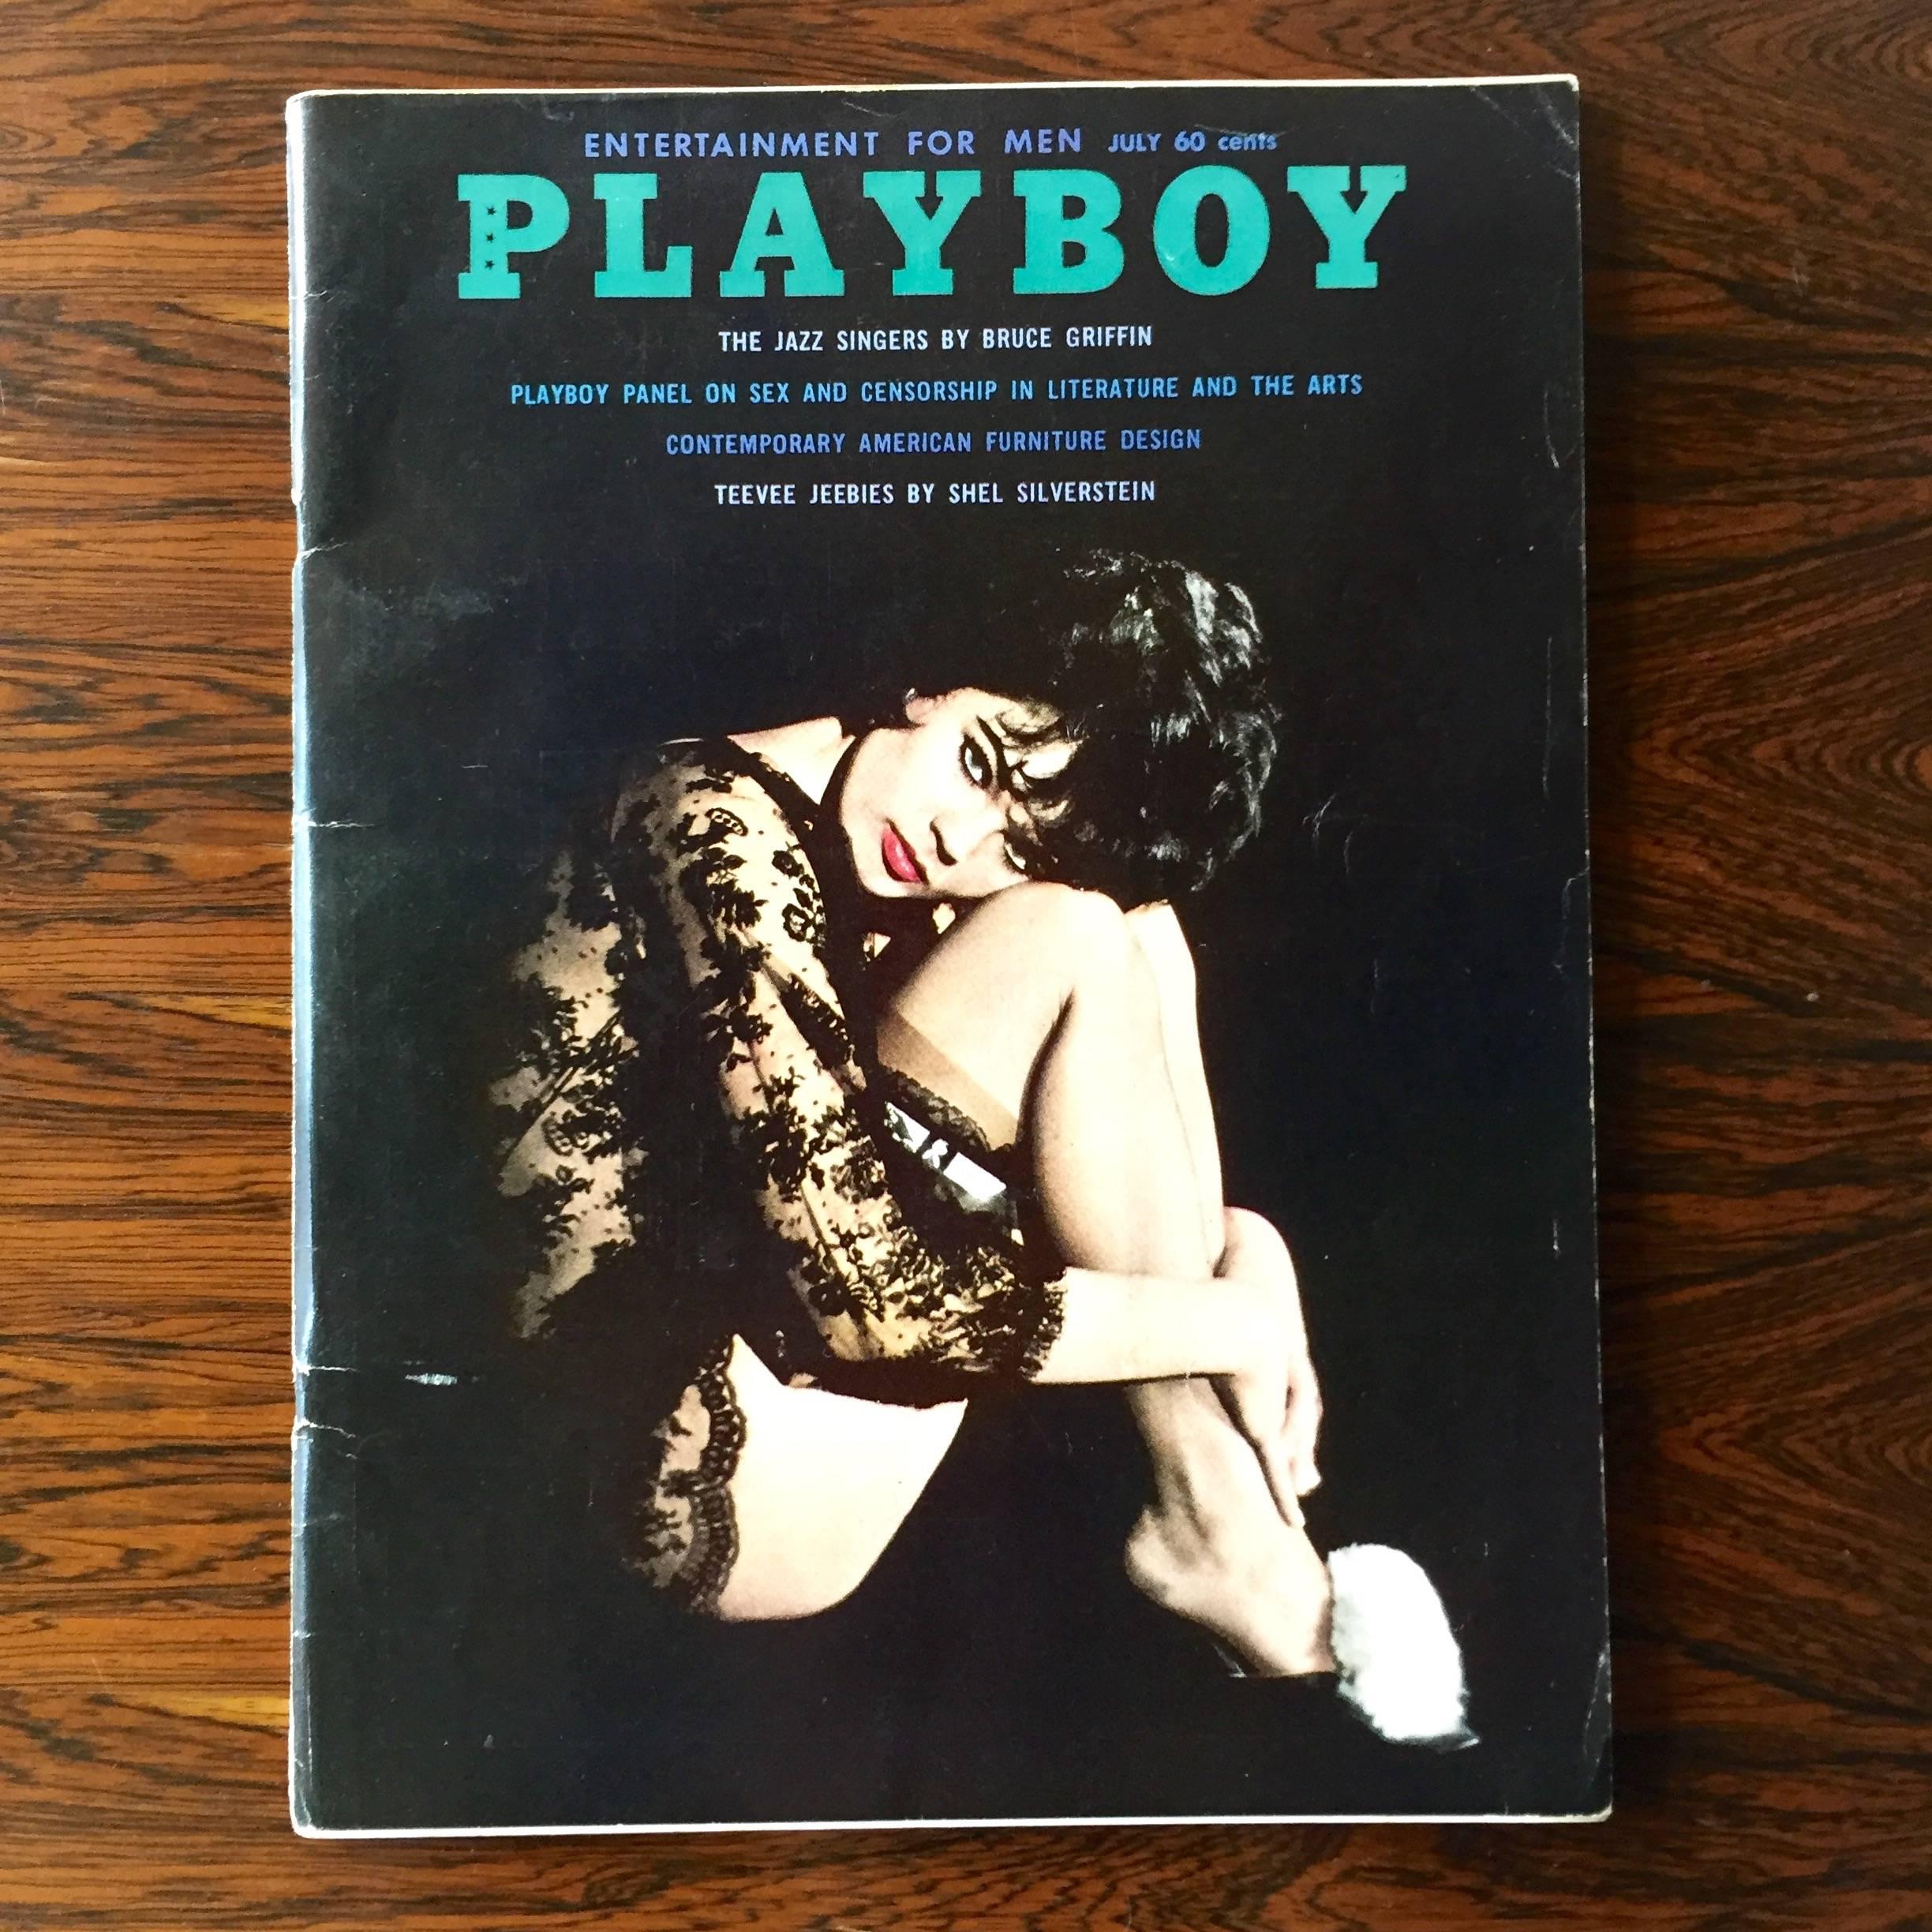 Ever laugh when someone said, “I only read Playboy for the articles”? You won’t anymore.

Up for sale is the July 1961 edition of Playboy Magazine. The Centerfold is nice, but the magazine’s real beauty is the spread on the masters of Mid-Century